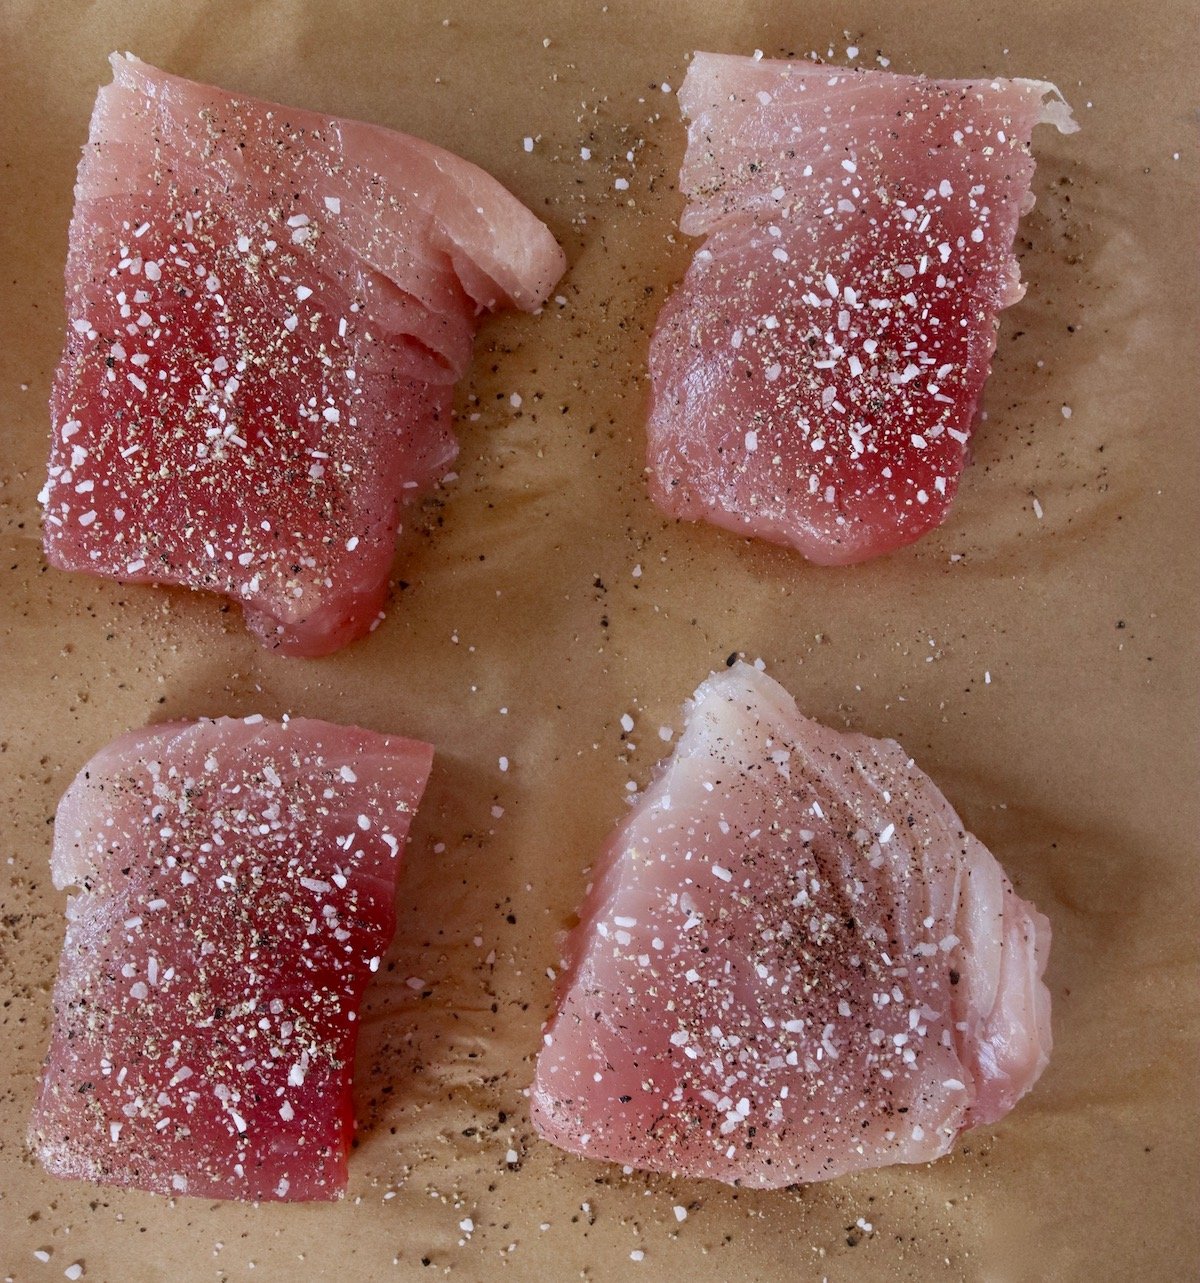 Four ahi tuna steaks seasoned with salt and pepper on parchment paper.